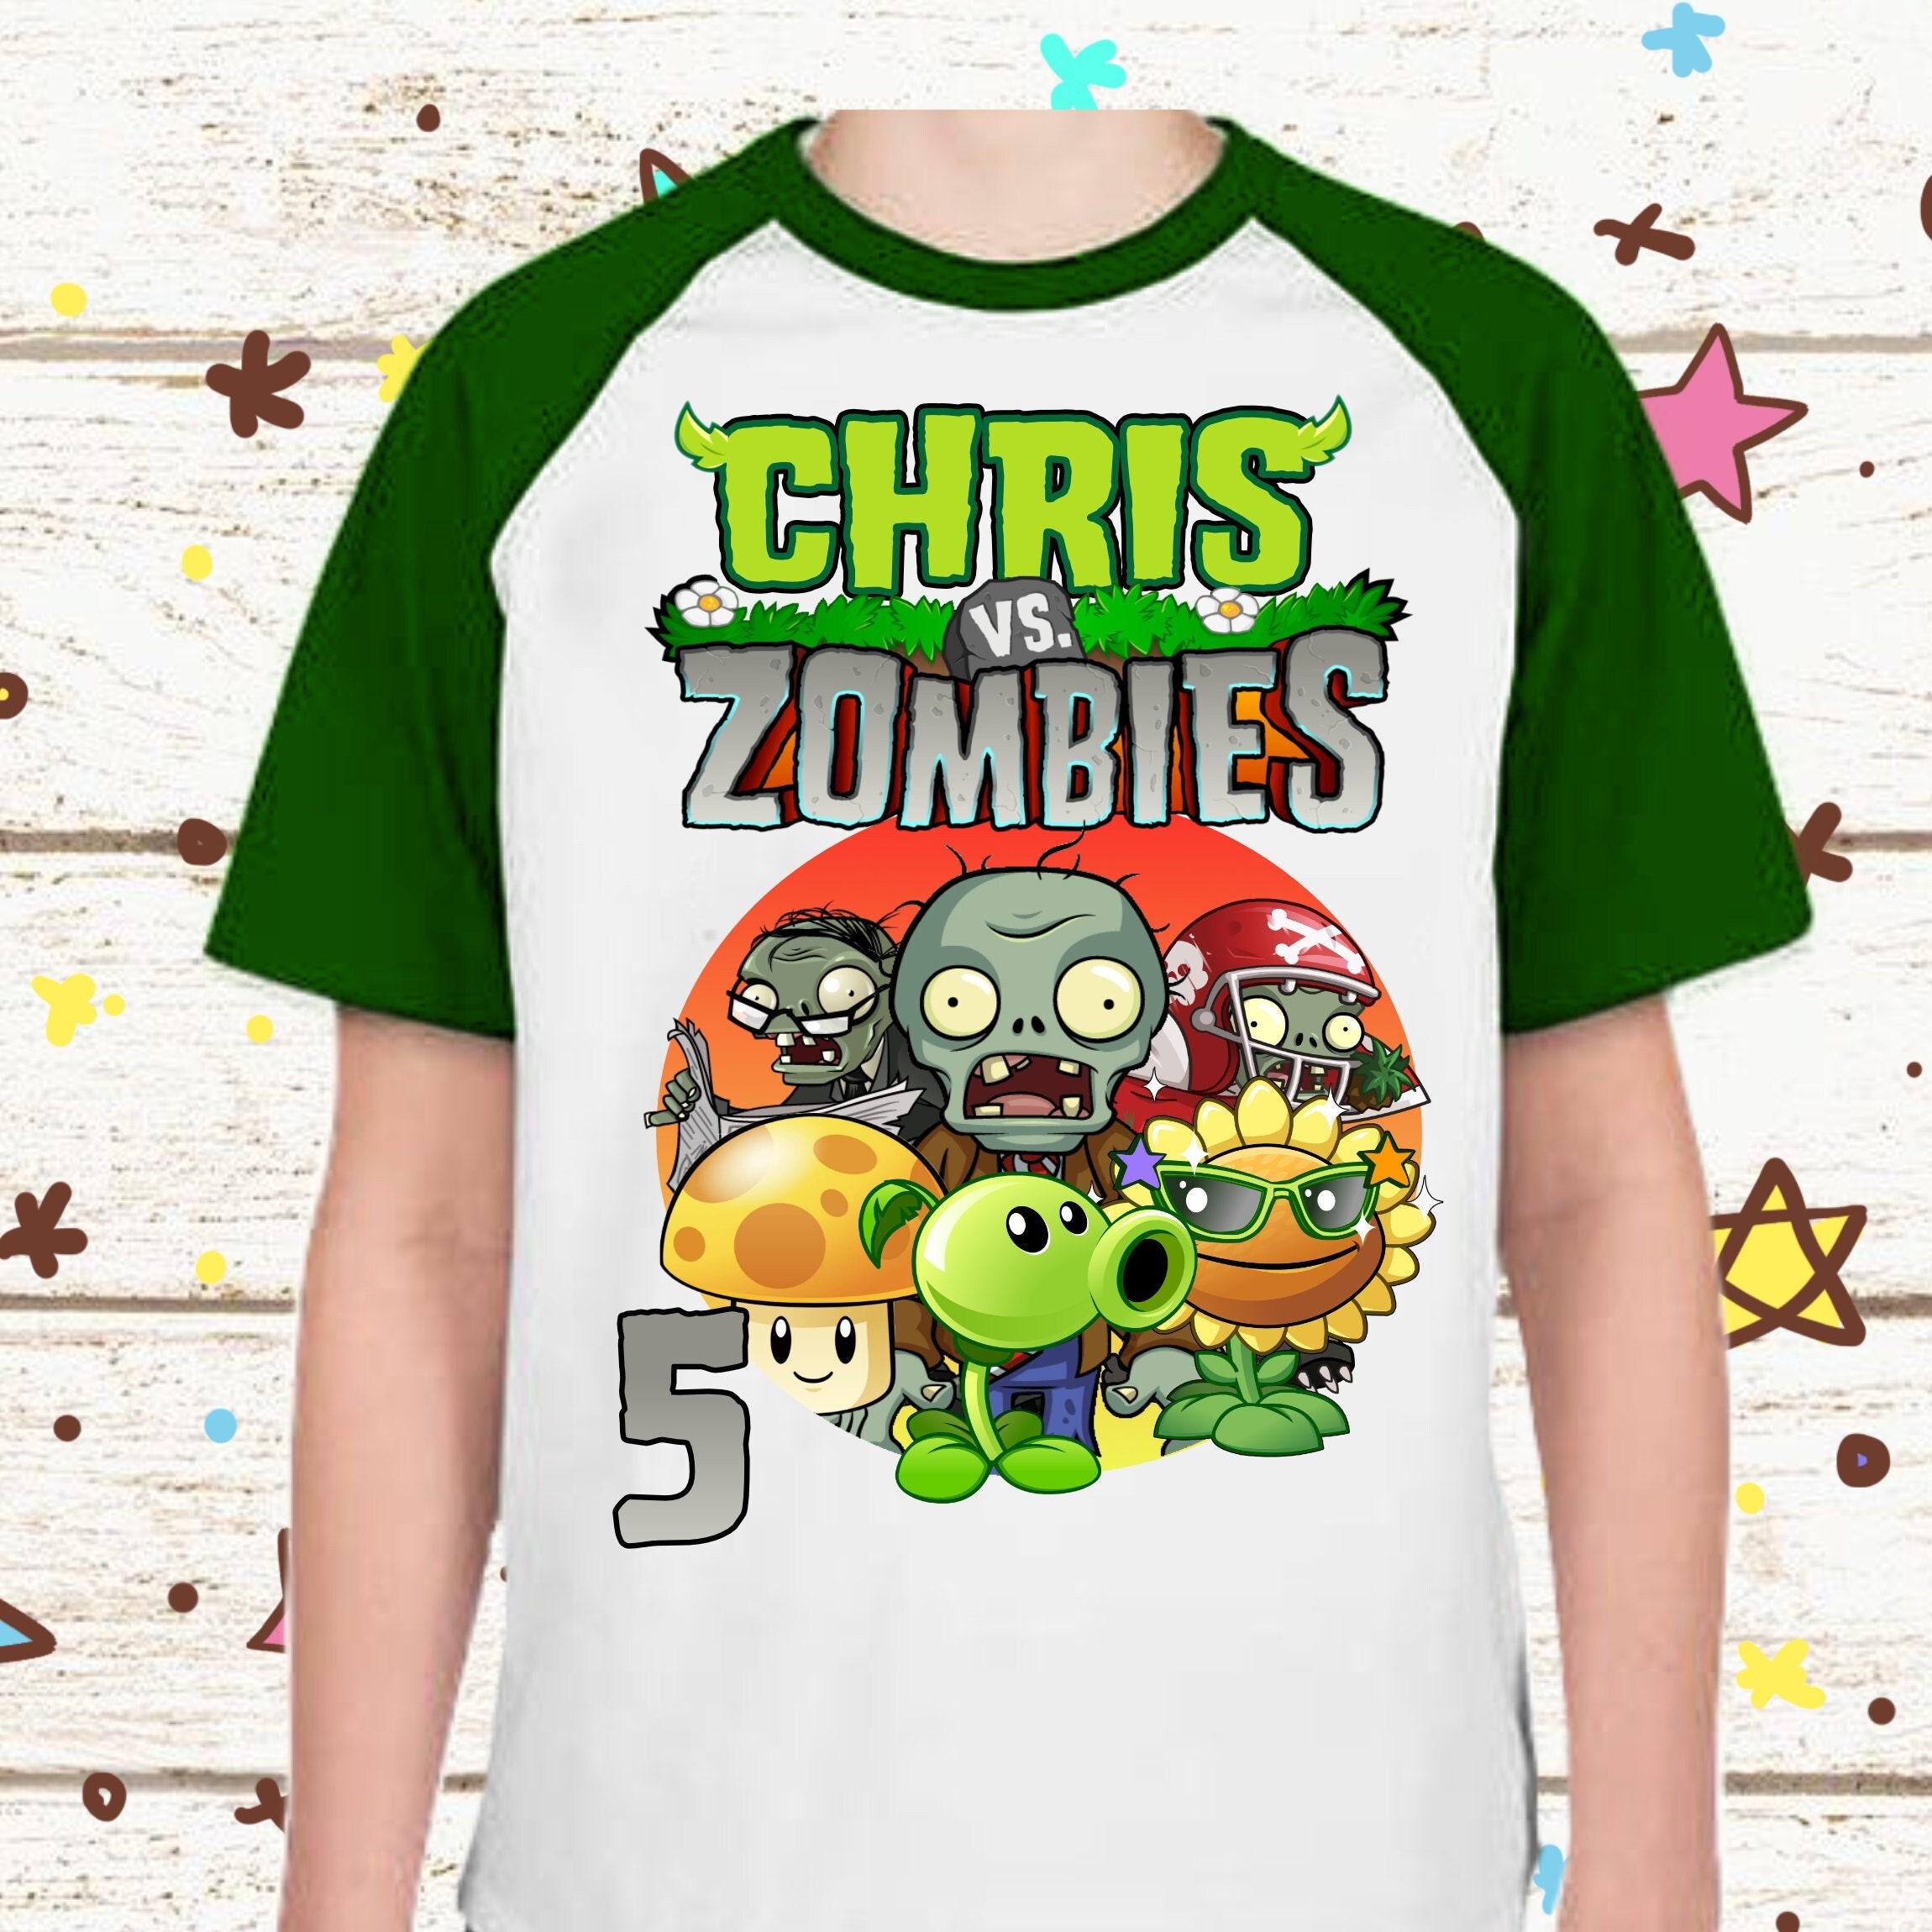 Zombie Grossing Plants vs Zombies T-Shirts